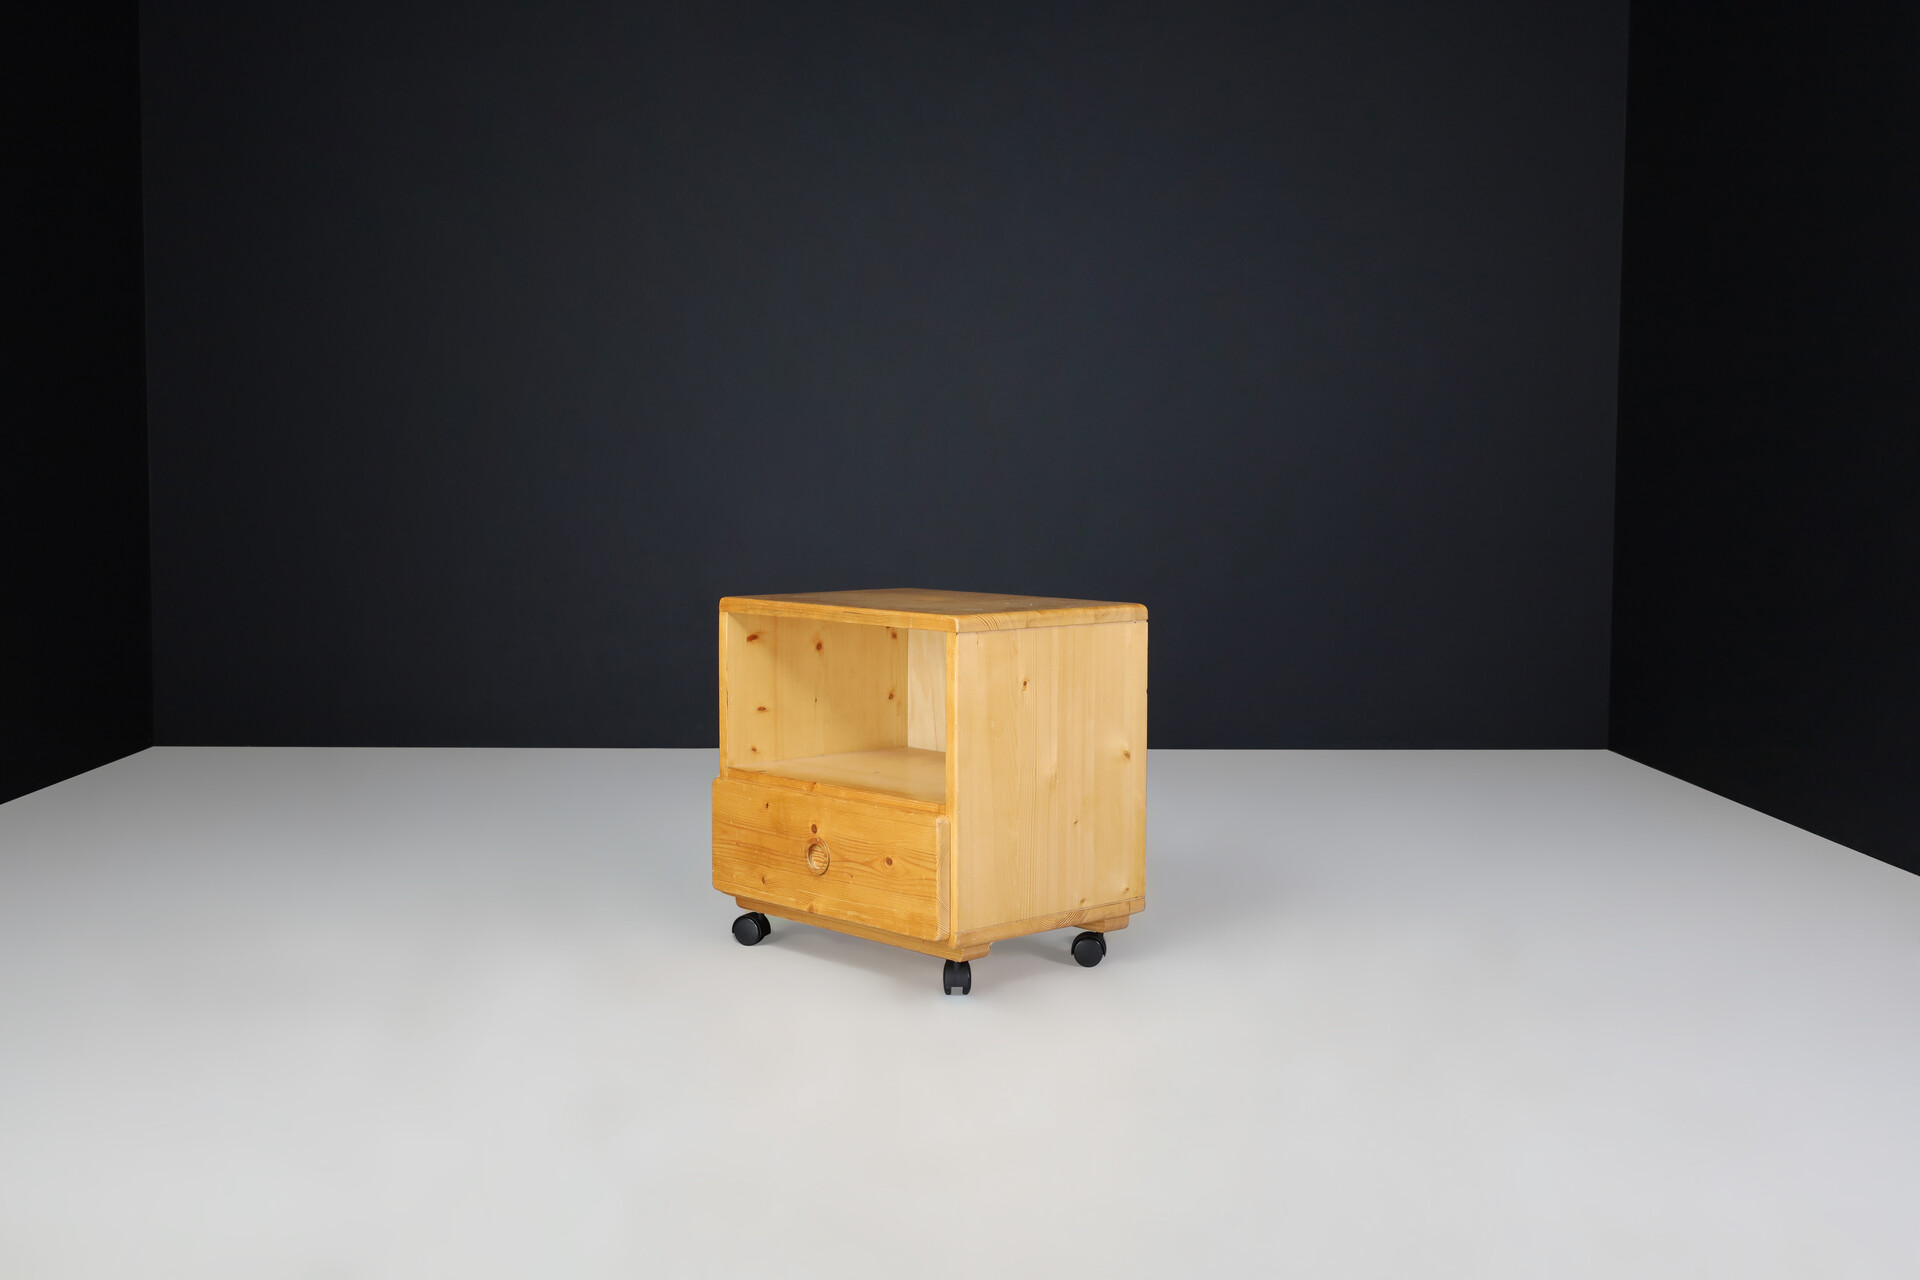 Mid century modern Charlotte Perriand Pine cabinet / cupboard for Les Arcs, France 1970s Mid-20th century